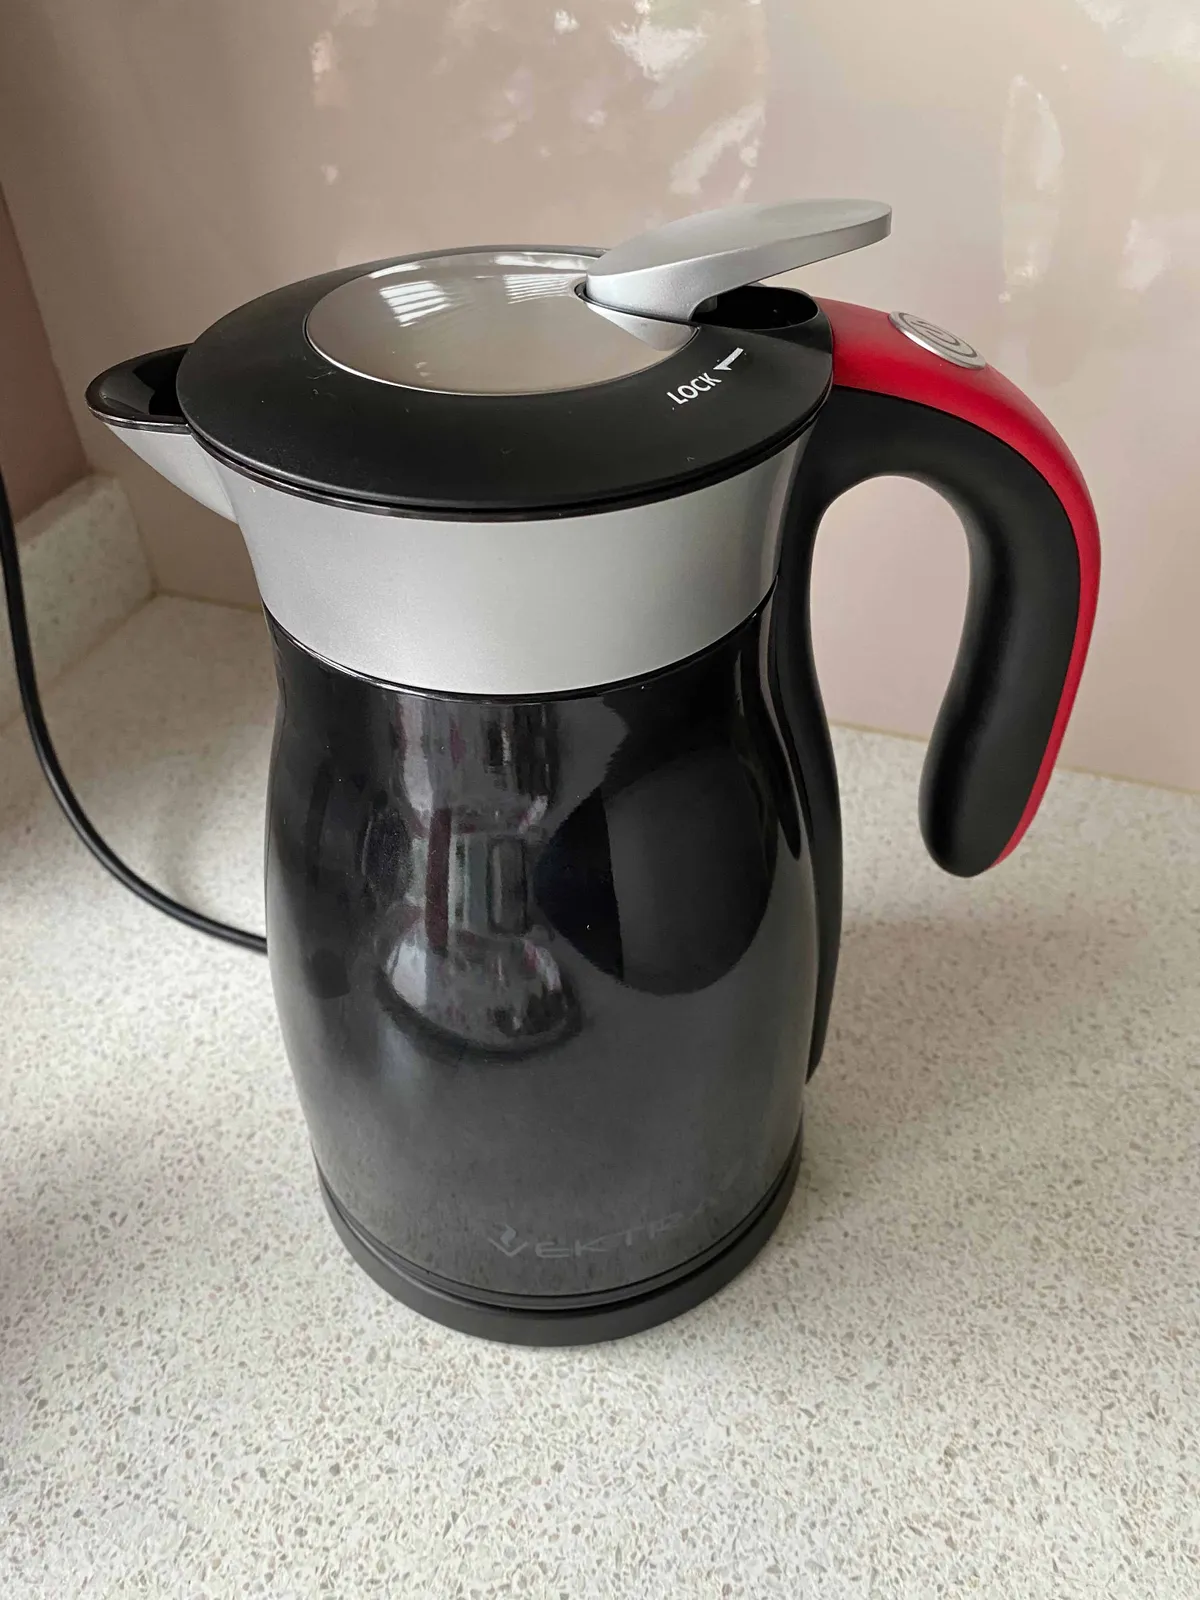 Vektra Vacuum Insulated Eco Friendly Kettle review